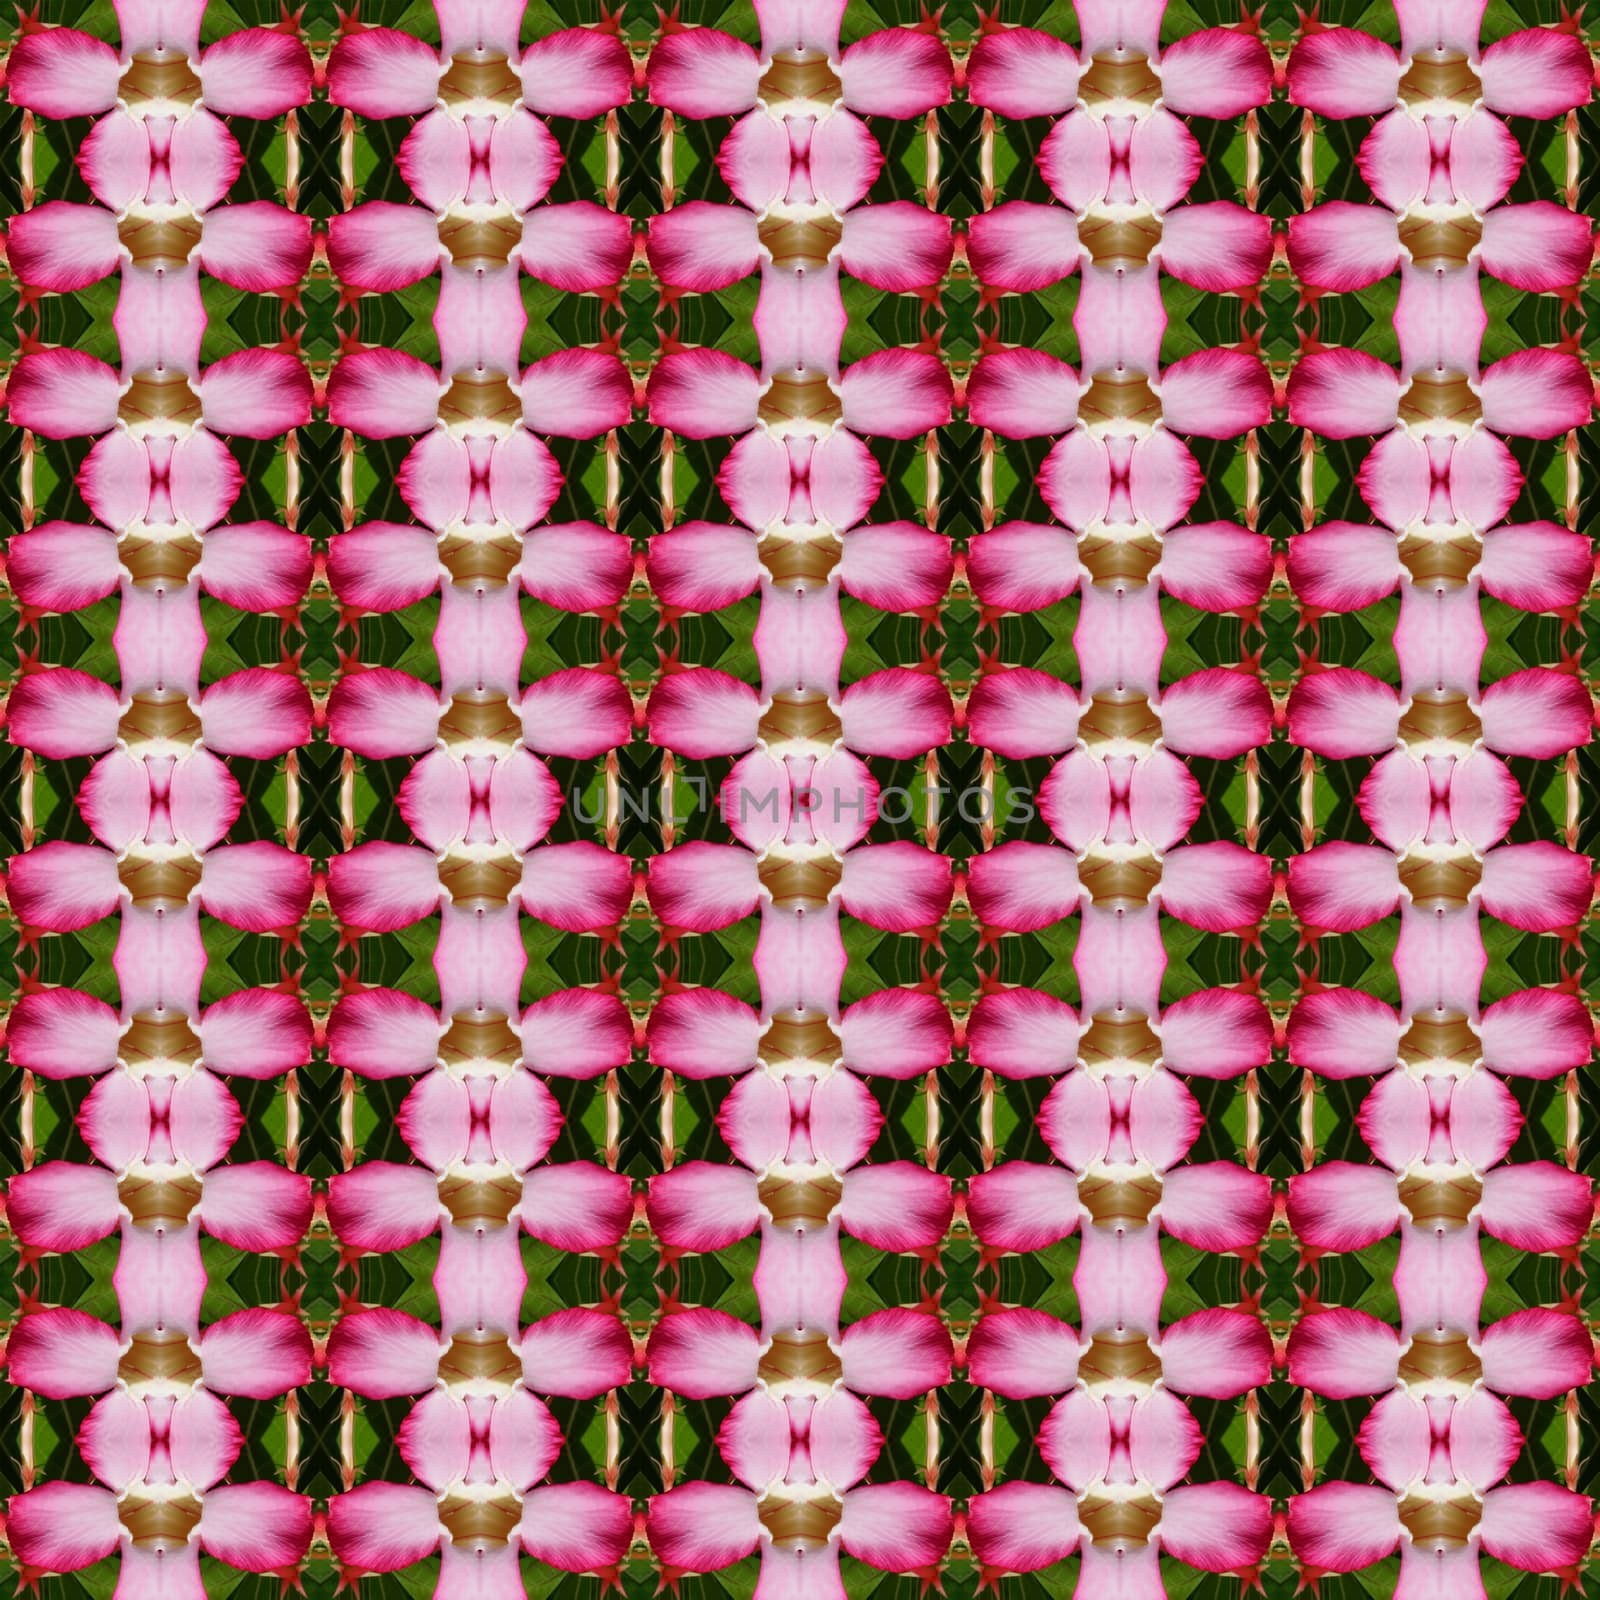 Adenium flowers or Impala Lily Adenium seamless use as pattern and wallpaper.